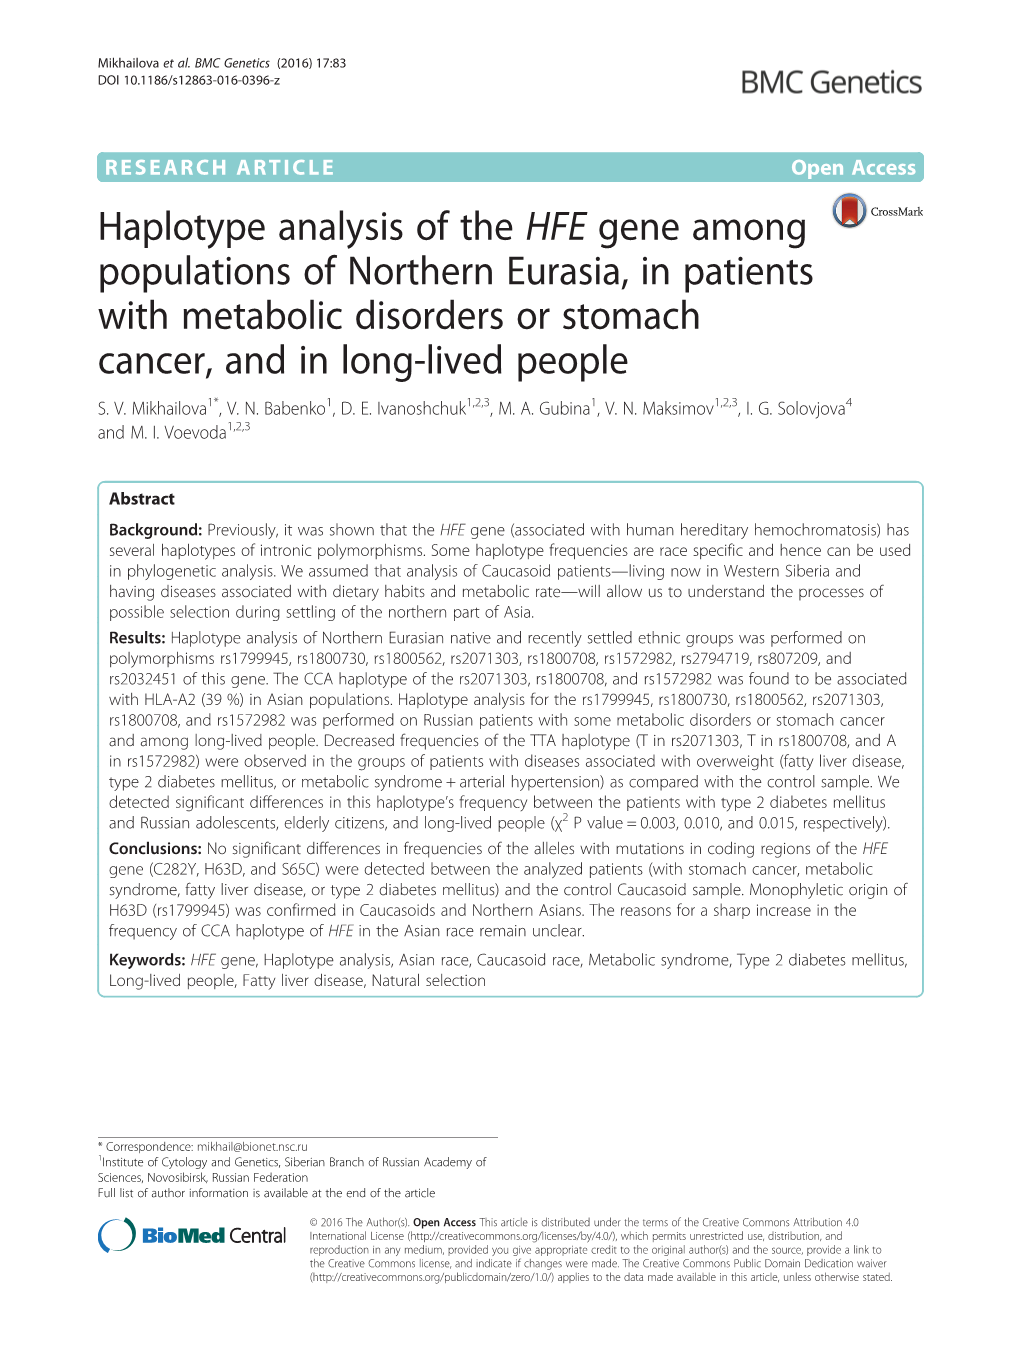 Haplotype Analysis of the HFE Gene Among Populations of Northern Eurasia, in Patients with Metabolic Disorders Or Stomach Cancer, and in Long-Lived People S